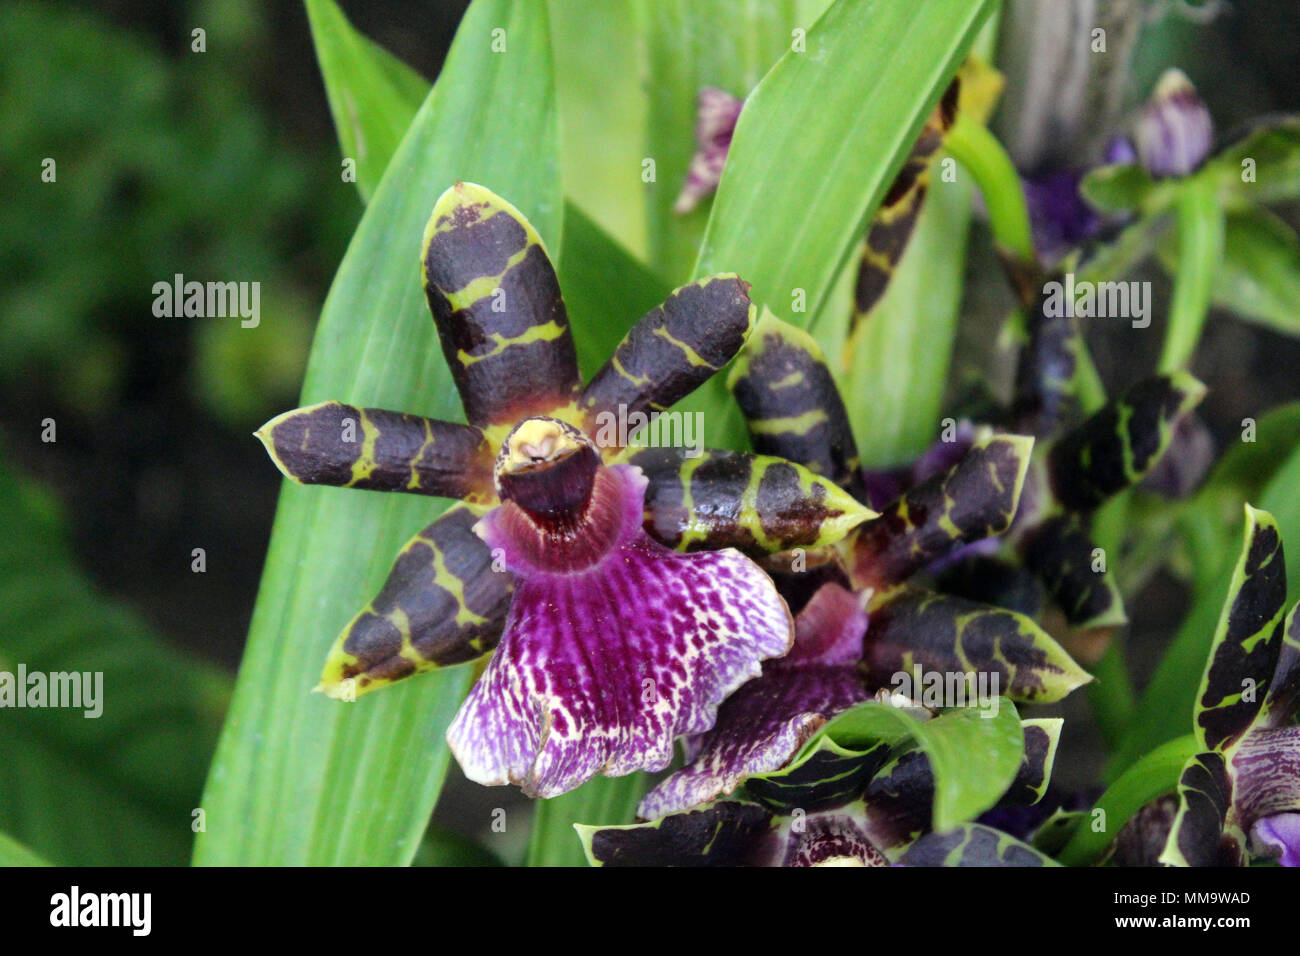 Close up of a cluster of Zygopetalum orchids in full bloom Stock Photo